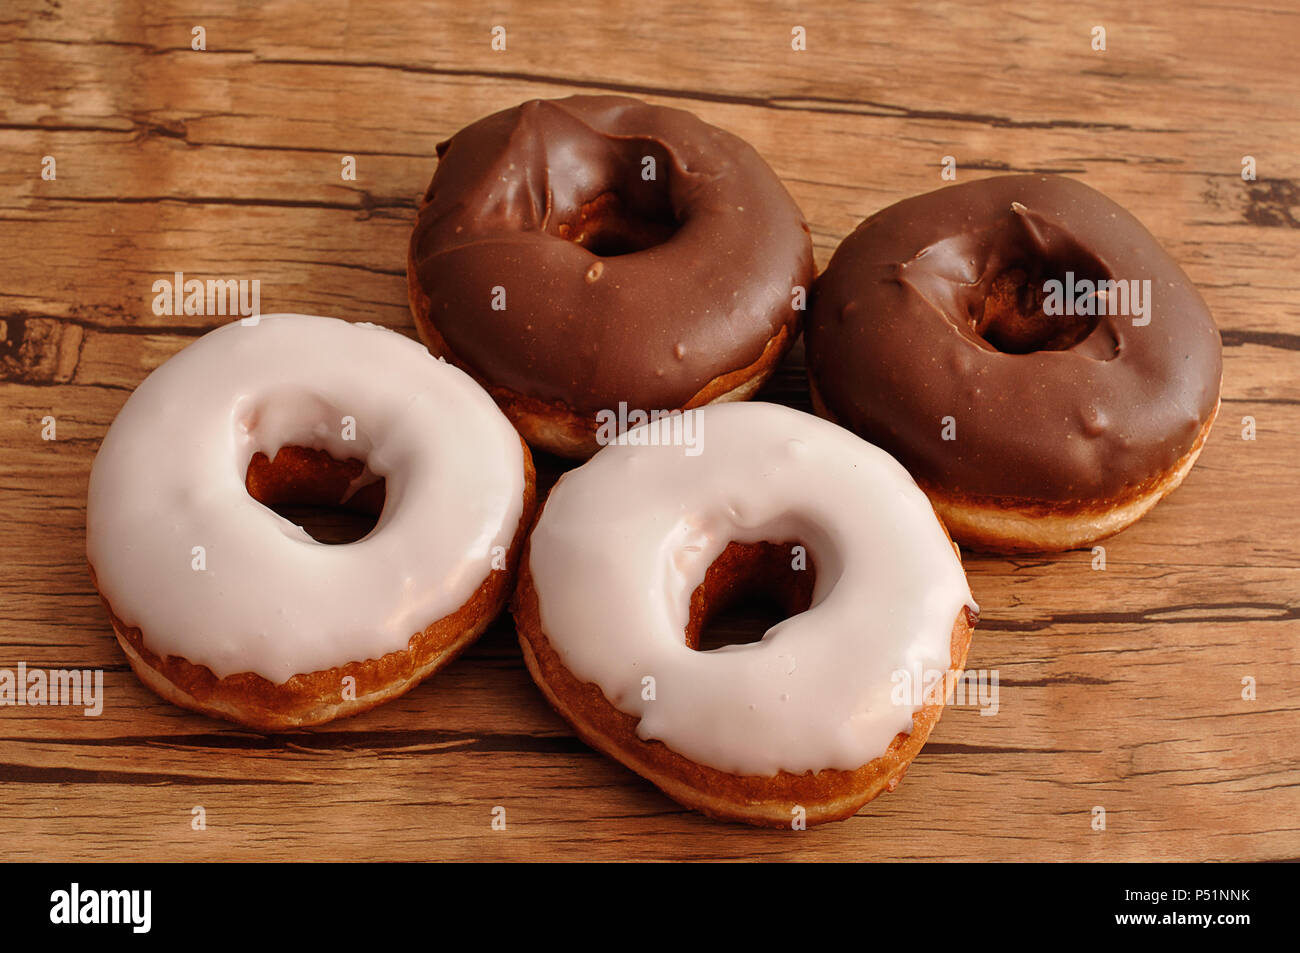 Four doughnuts displayed on a wooden table Stock Photo